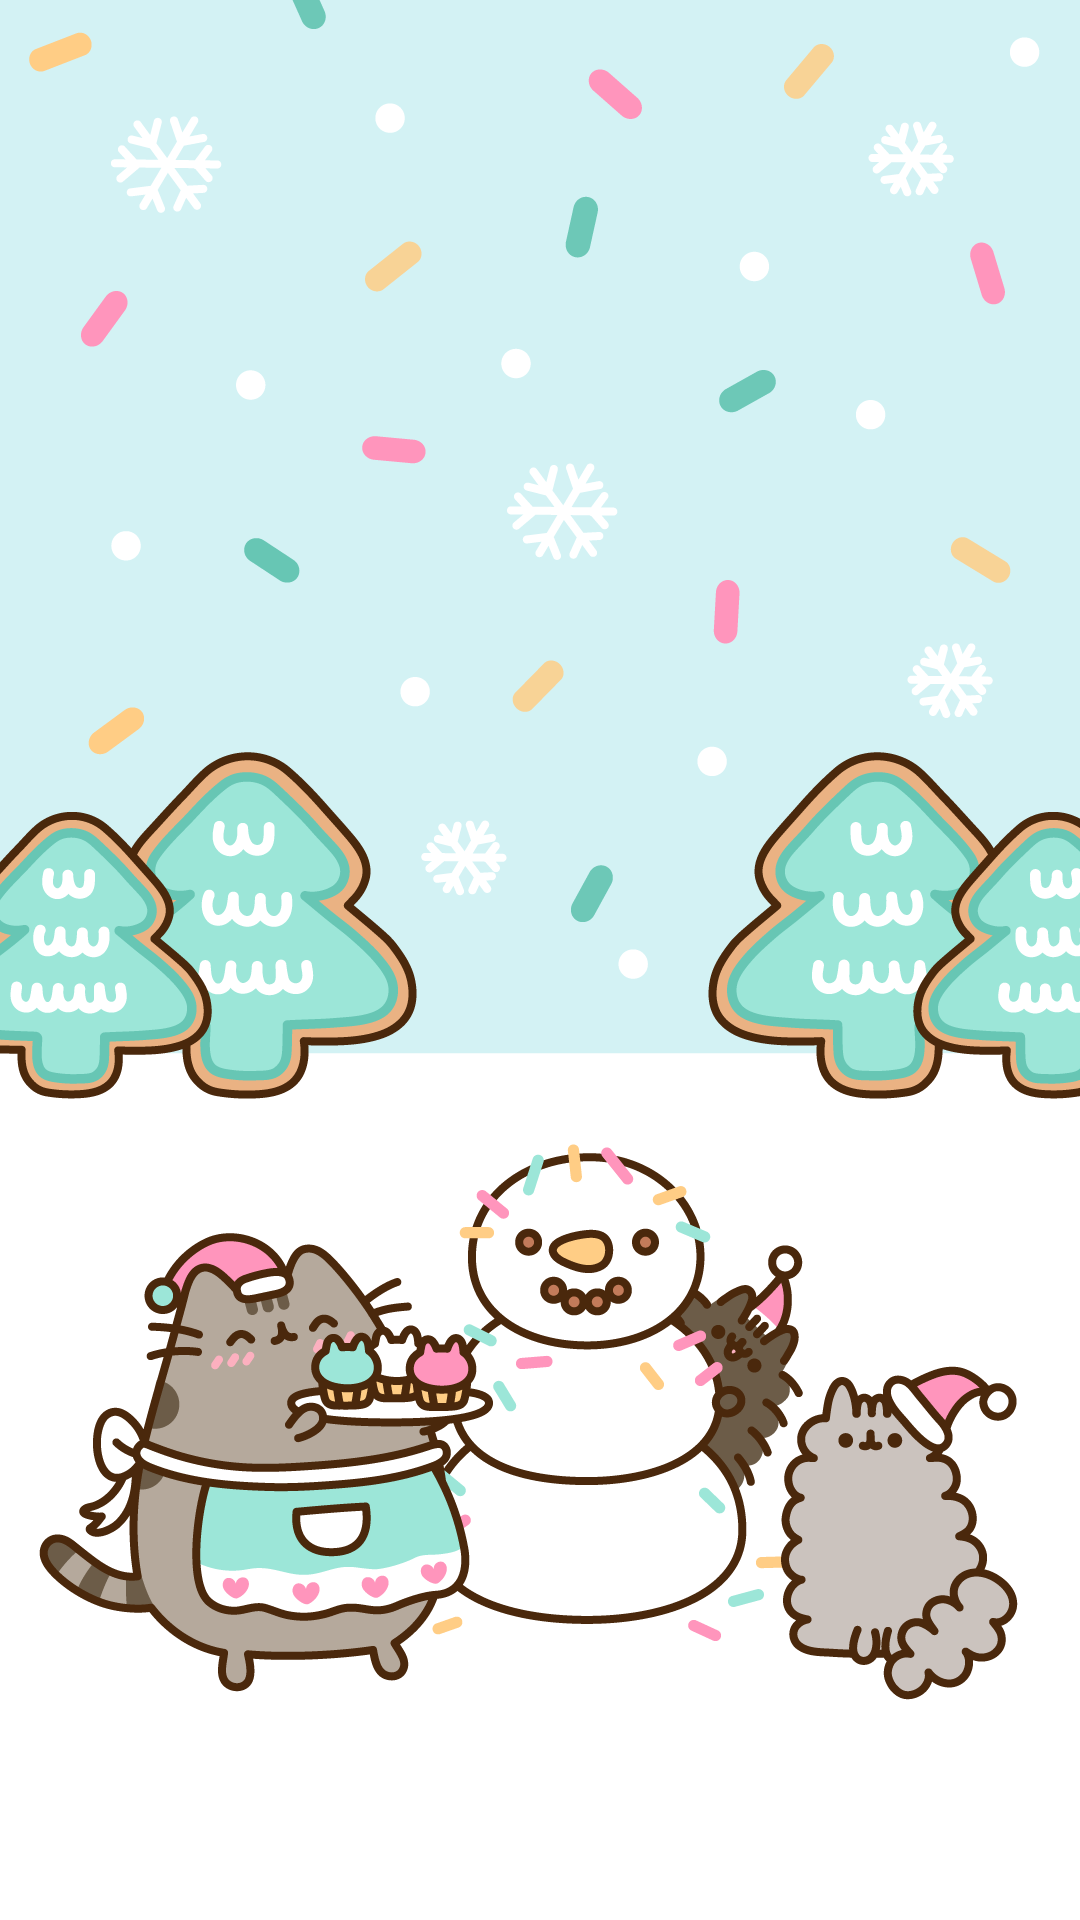 FREE Exclusive Pusheen Android and iPhone® Christmas Wallpaper - #ClairesBlog. Wallpaper iphone christmas, Pusheen christmas, Christmas phone wallpaper